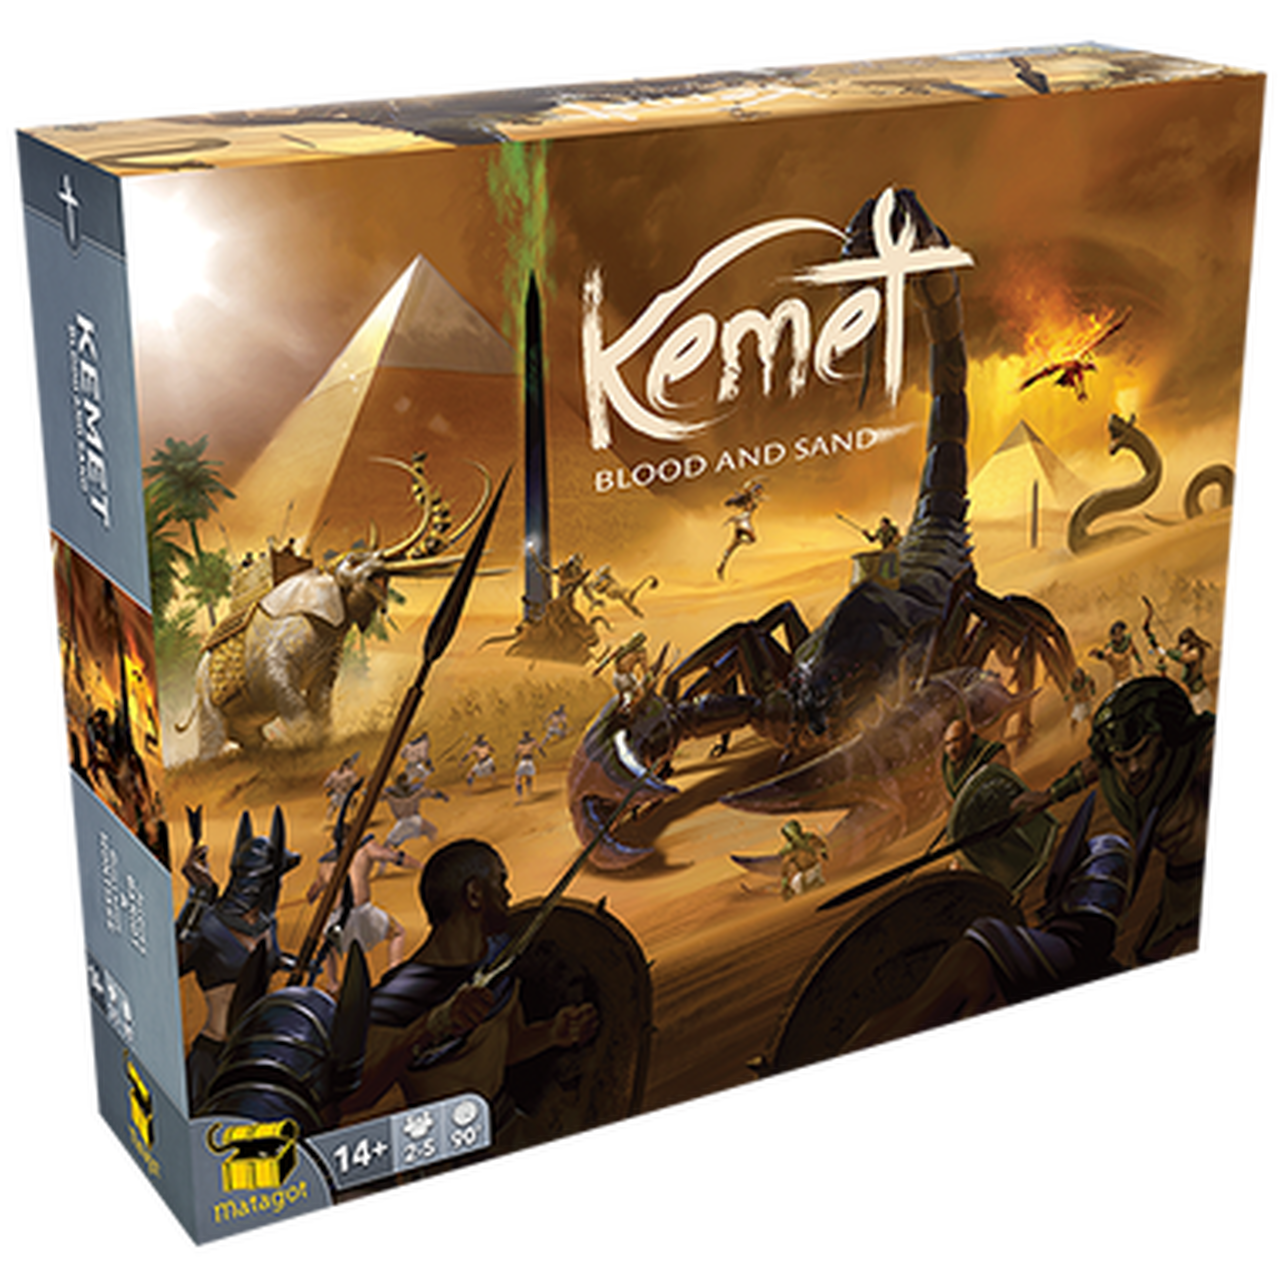 Kemet Blood and Sand | Anubis Games and Hobby